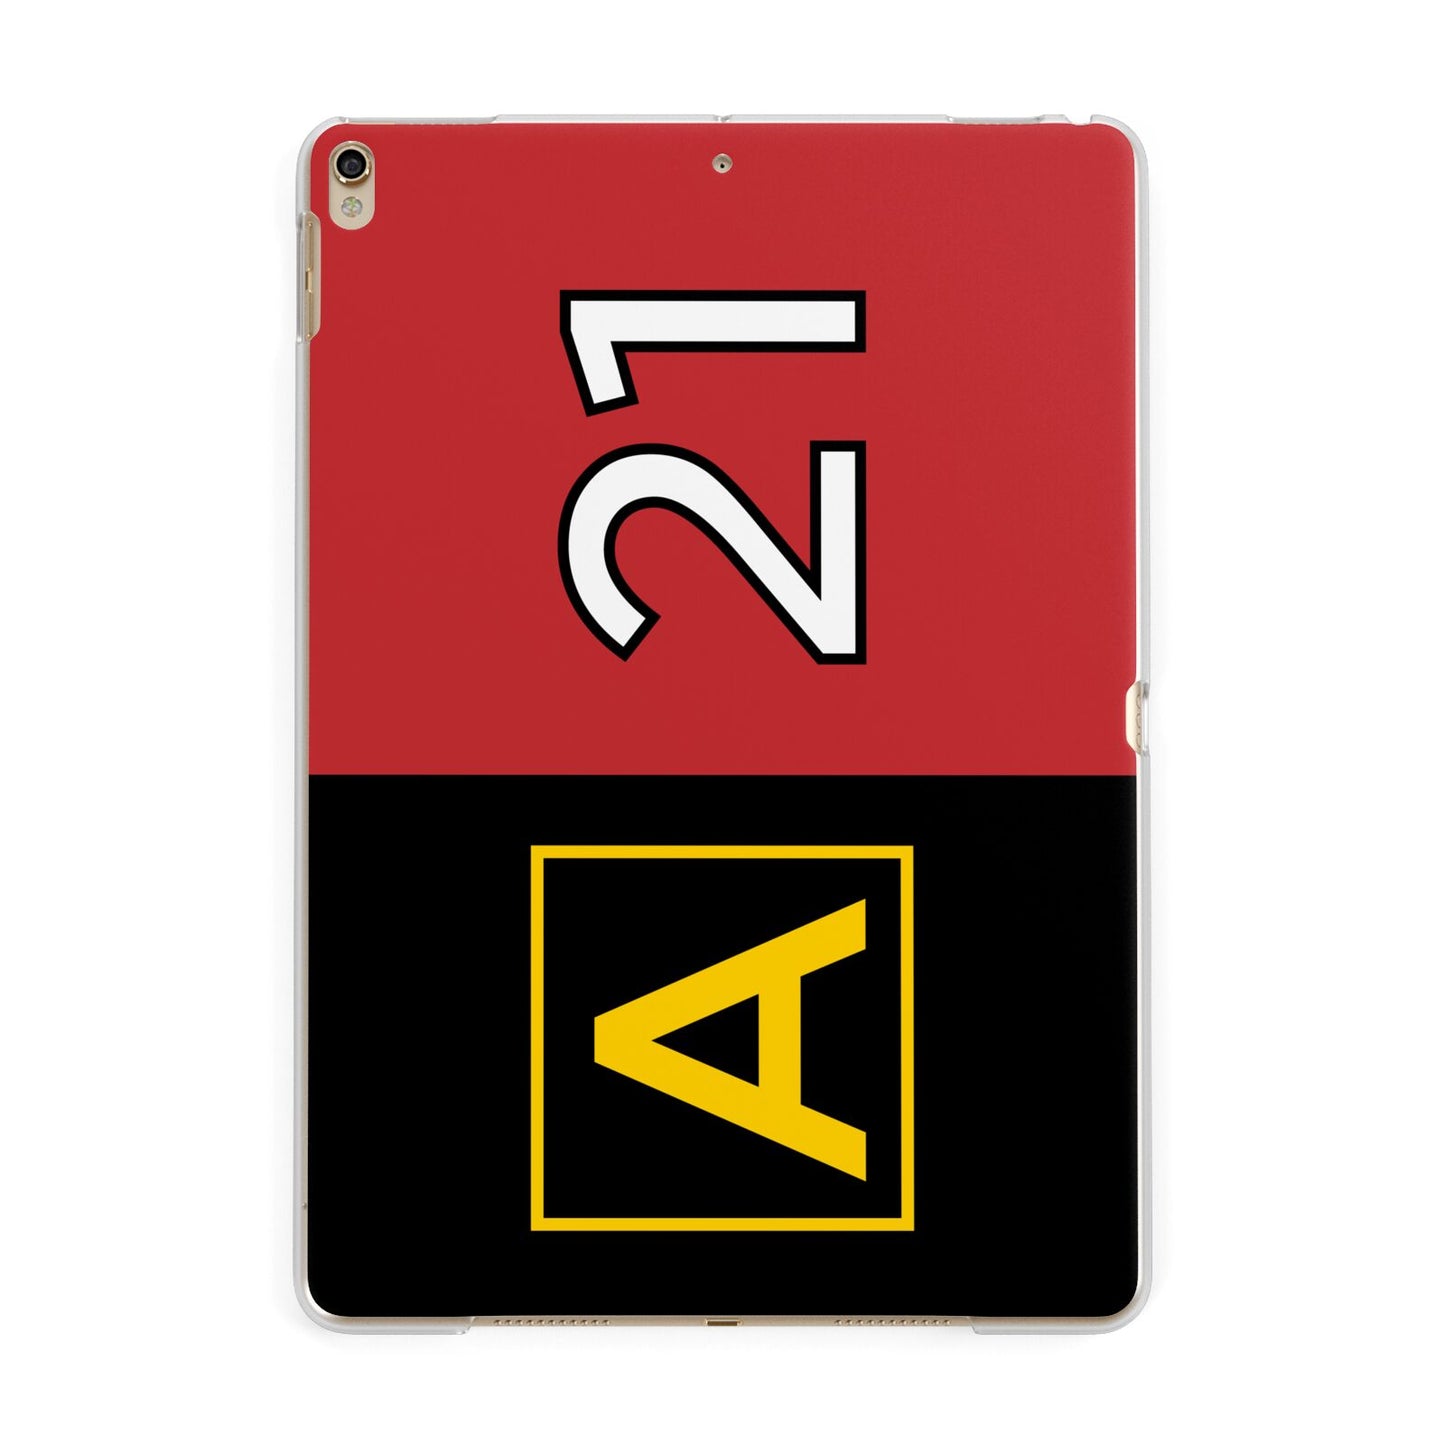 Custom Runway Location and Hold Position Apple iPad Gold Case